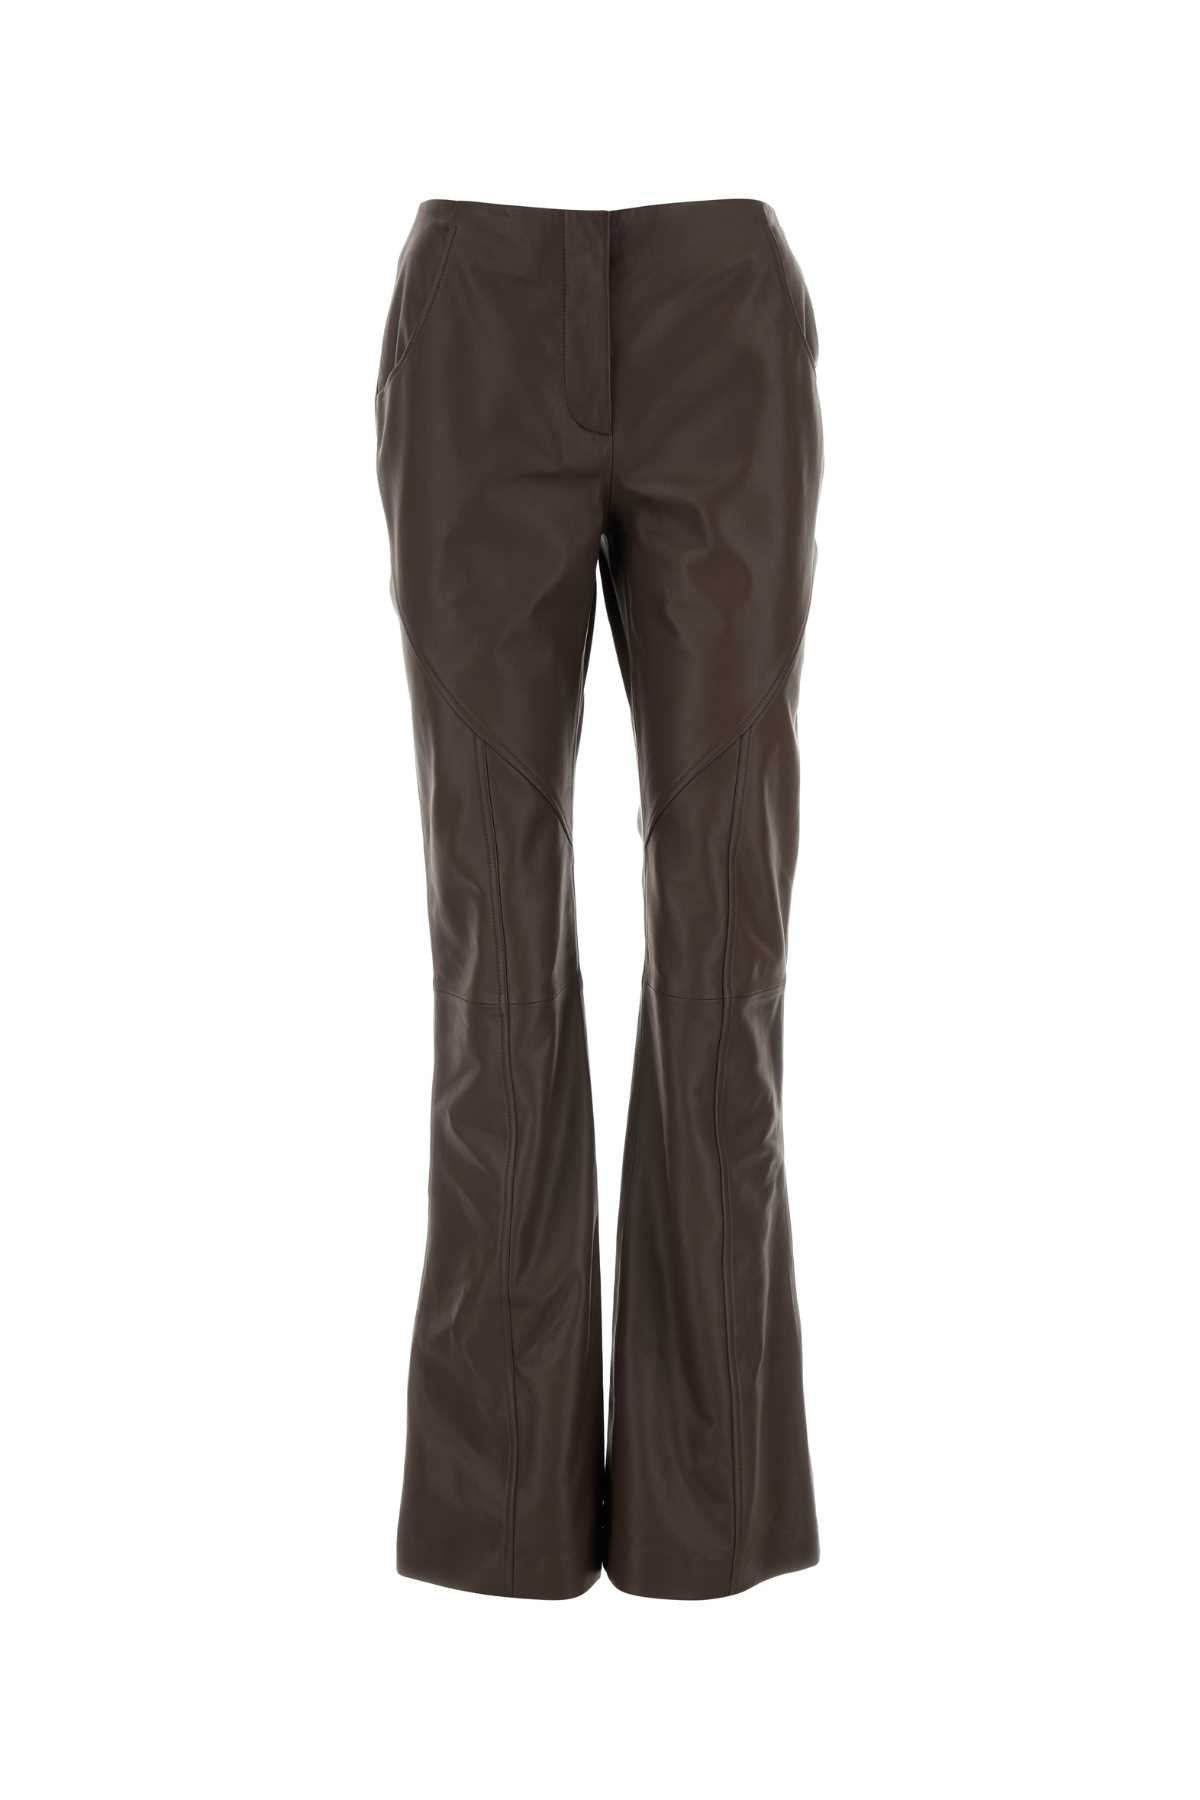 Chocolate Leather Pant